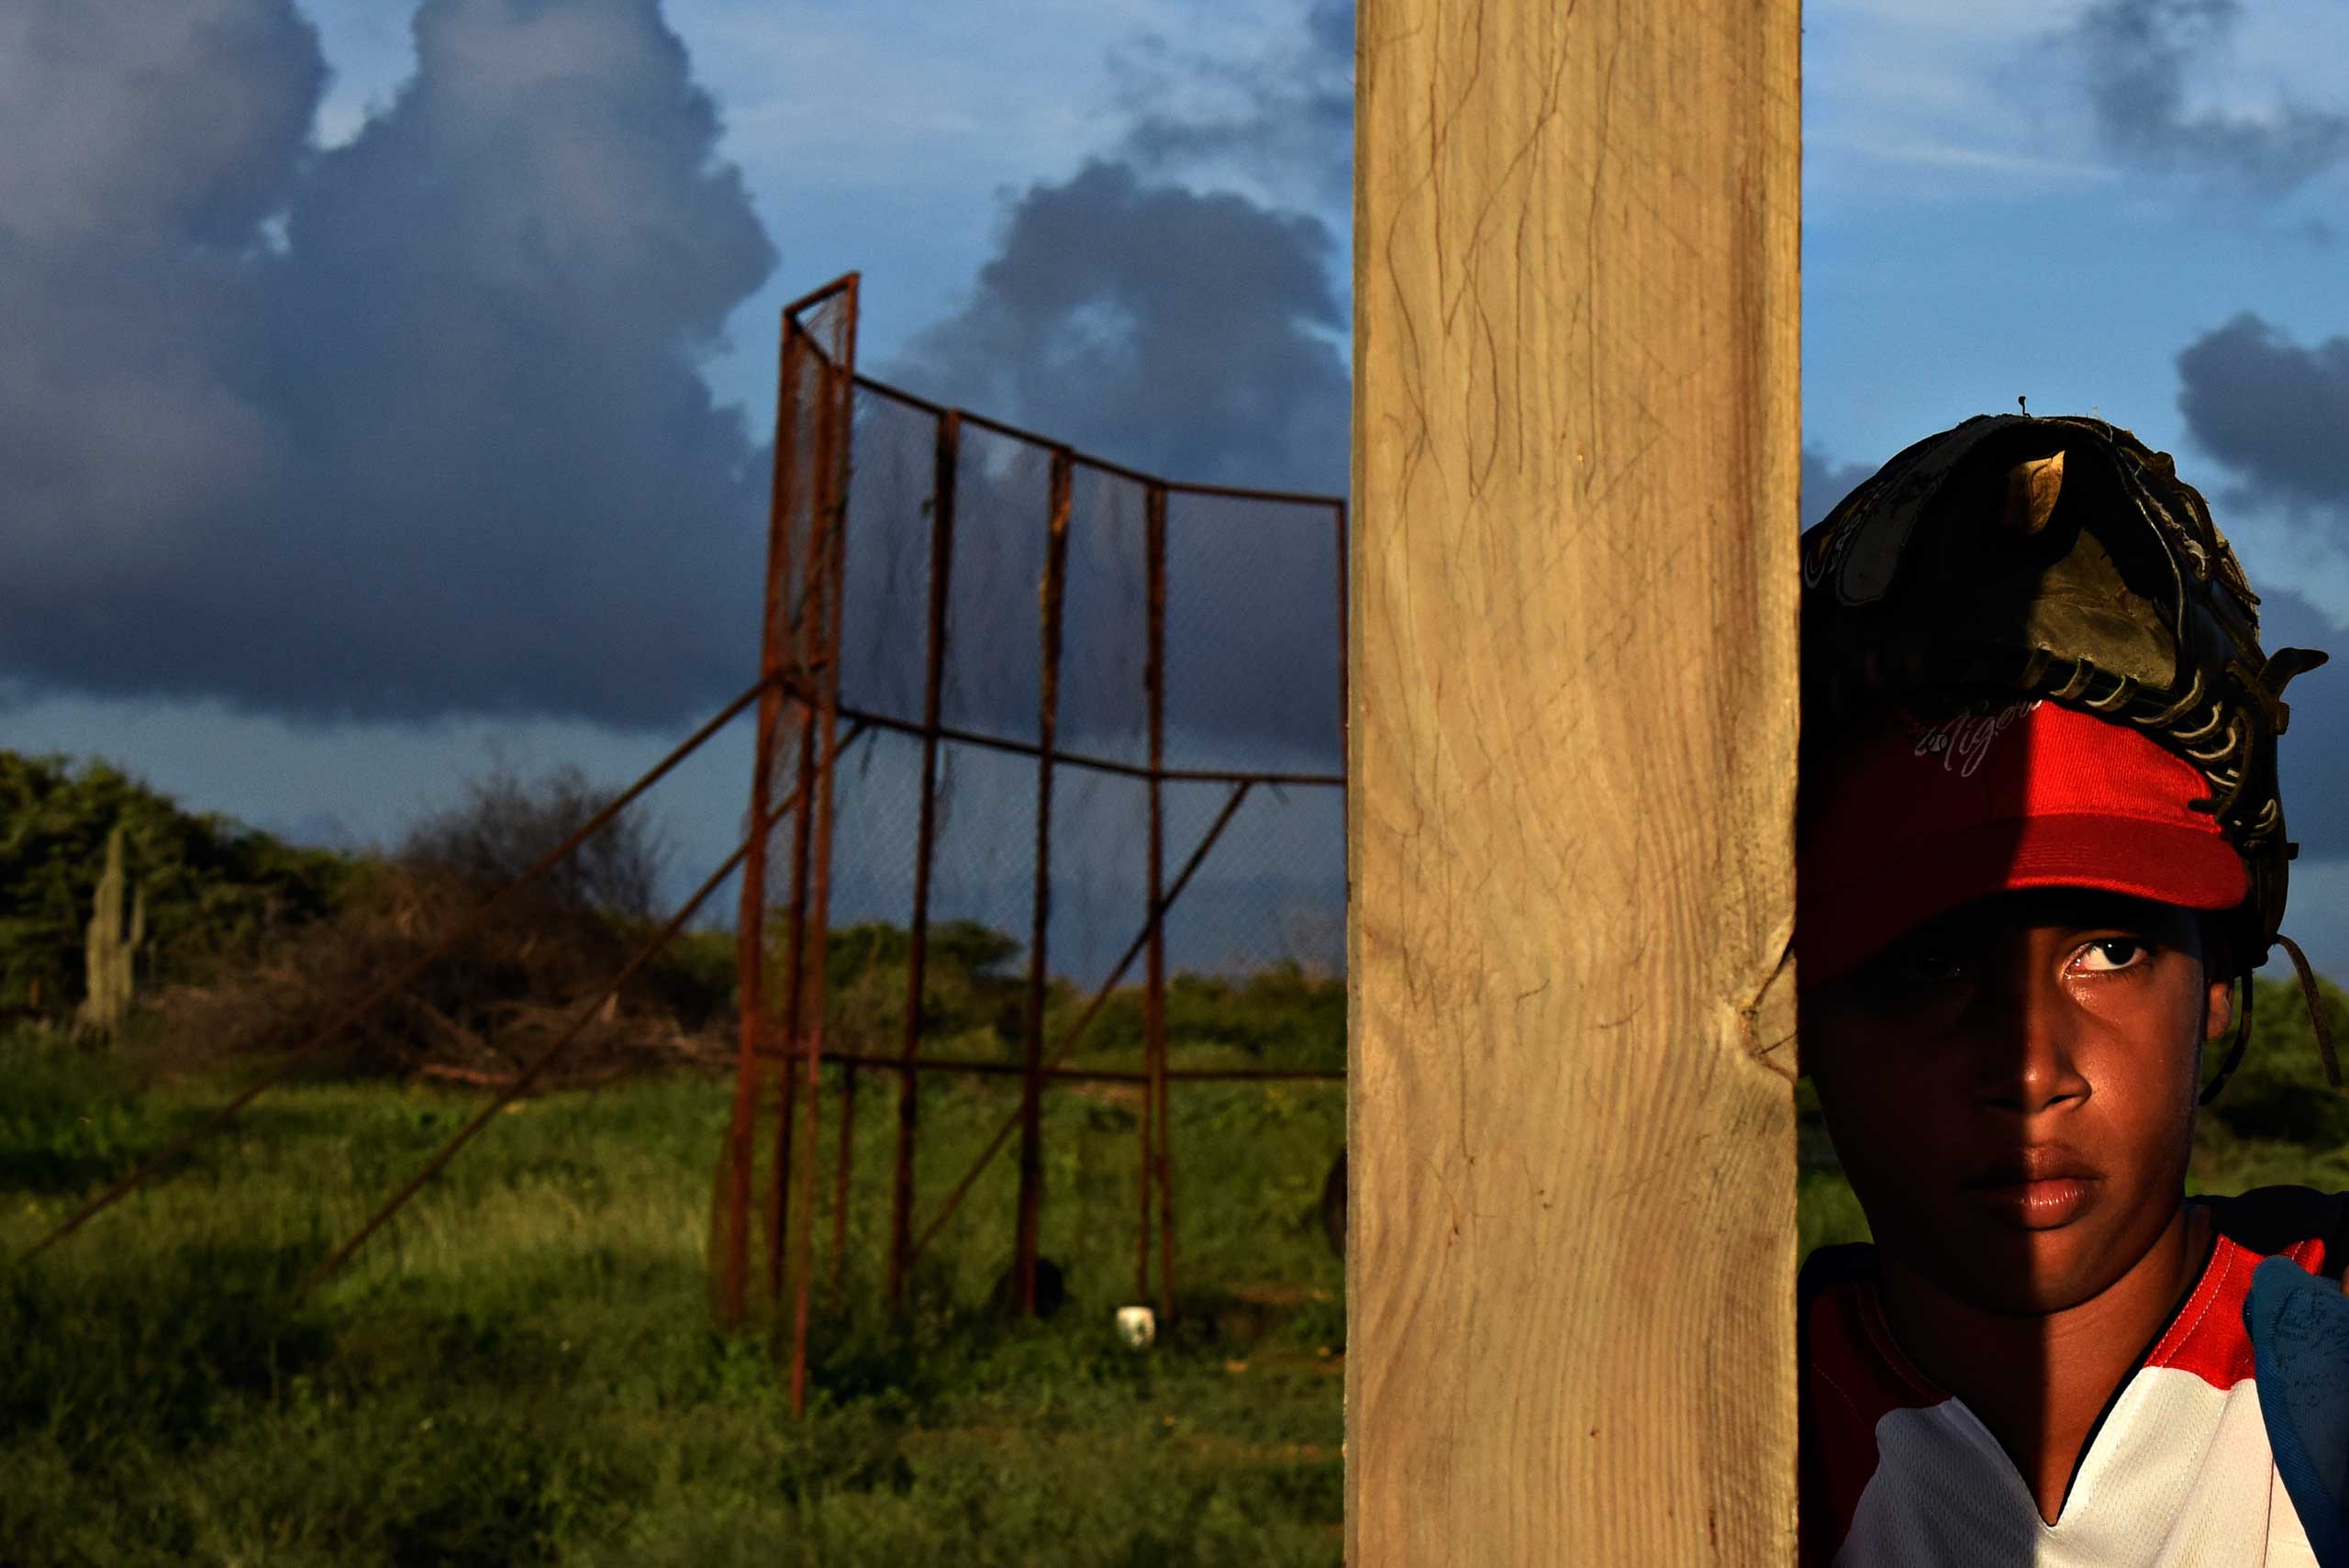 The New York Times: An Unlikely Source of Big TalentA boy on a baseball field in Tera Kora, Curacao, Dec. 10, 2014. Despite —or perhaps because of—the rough fields, the tiny island near Venezuela has become a source for numerous major league baseball stars.